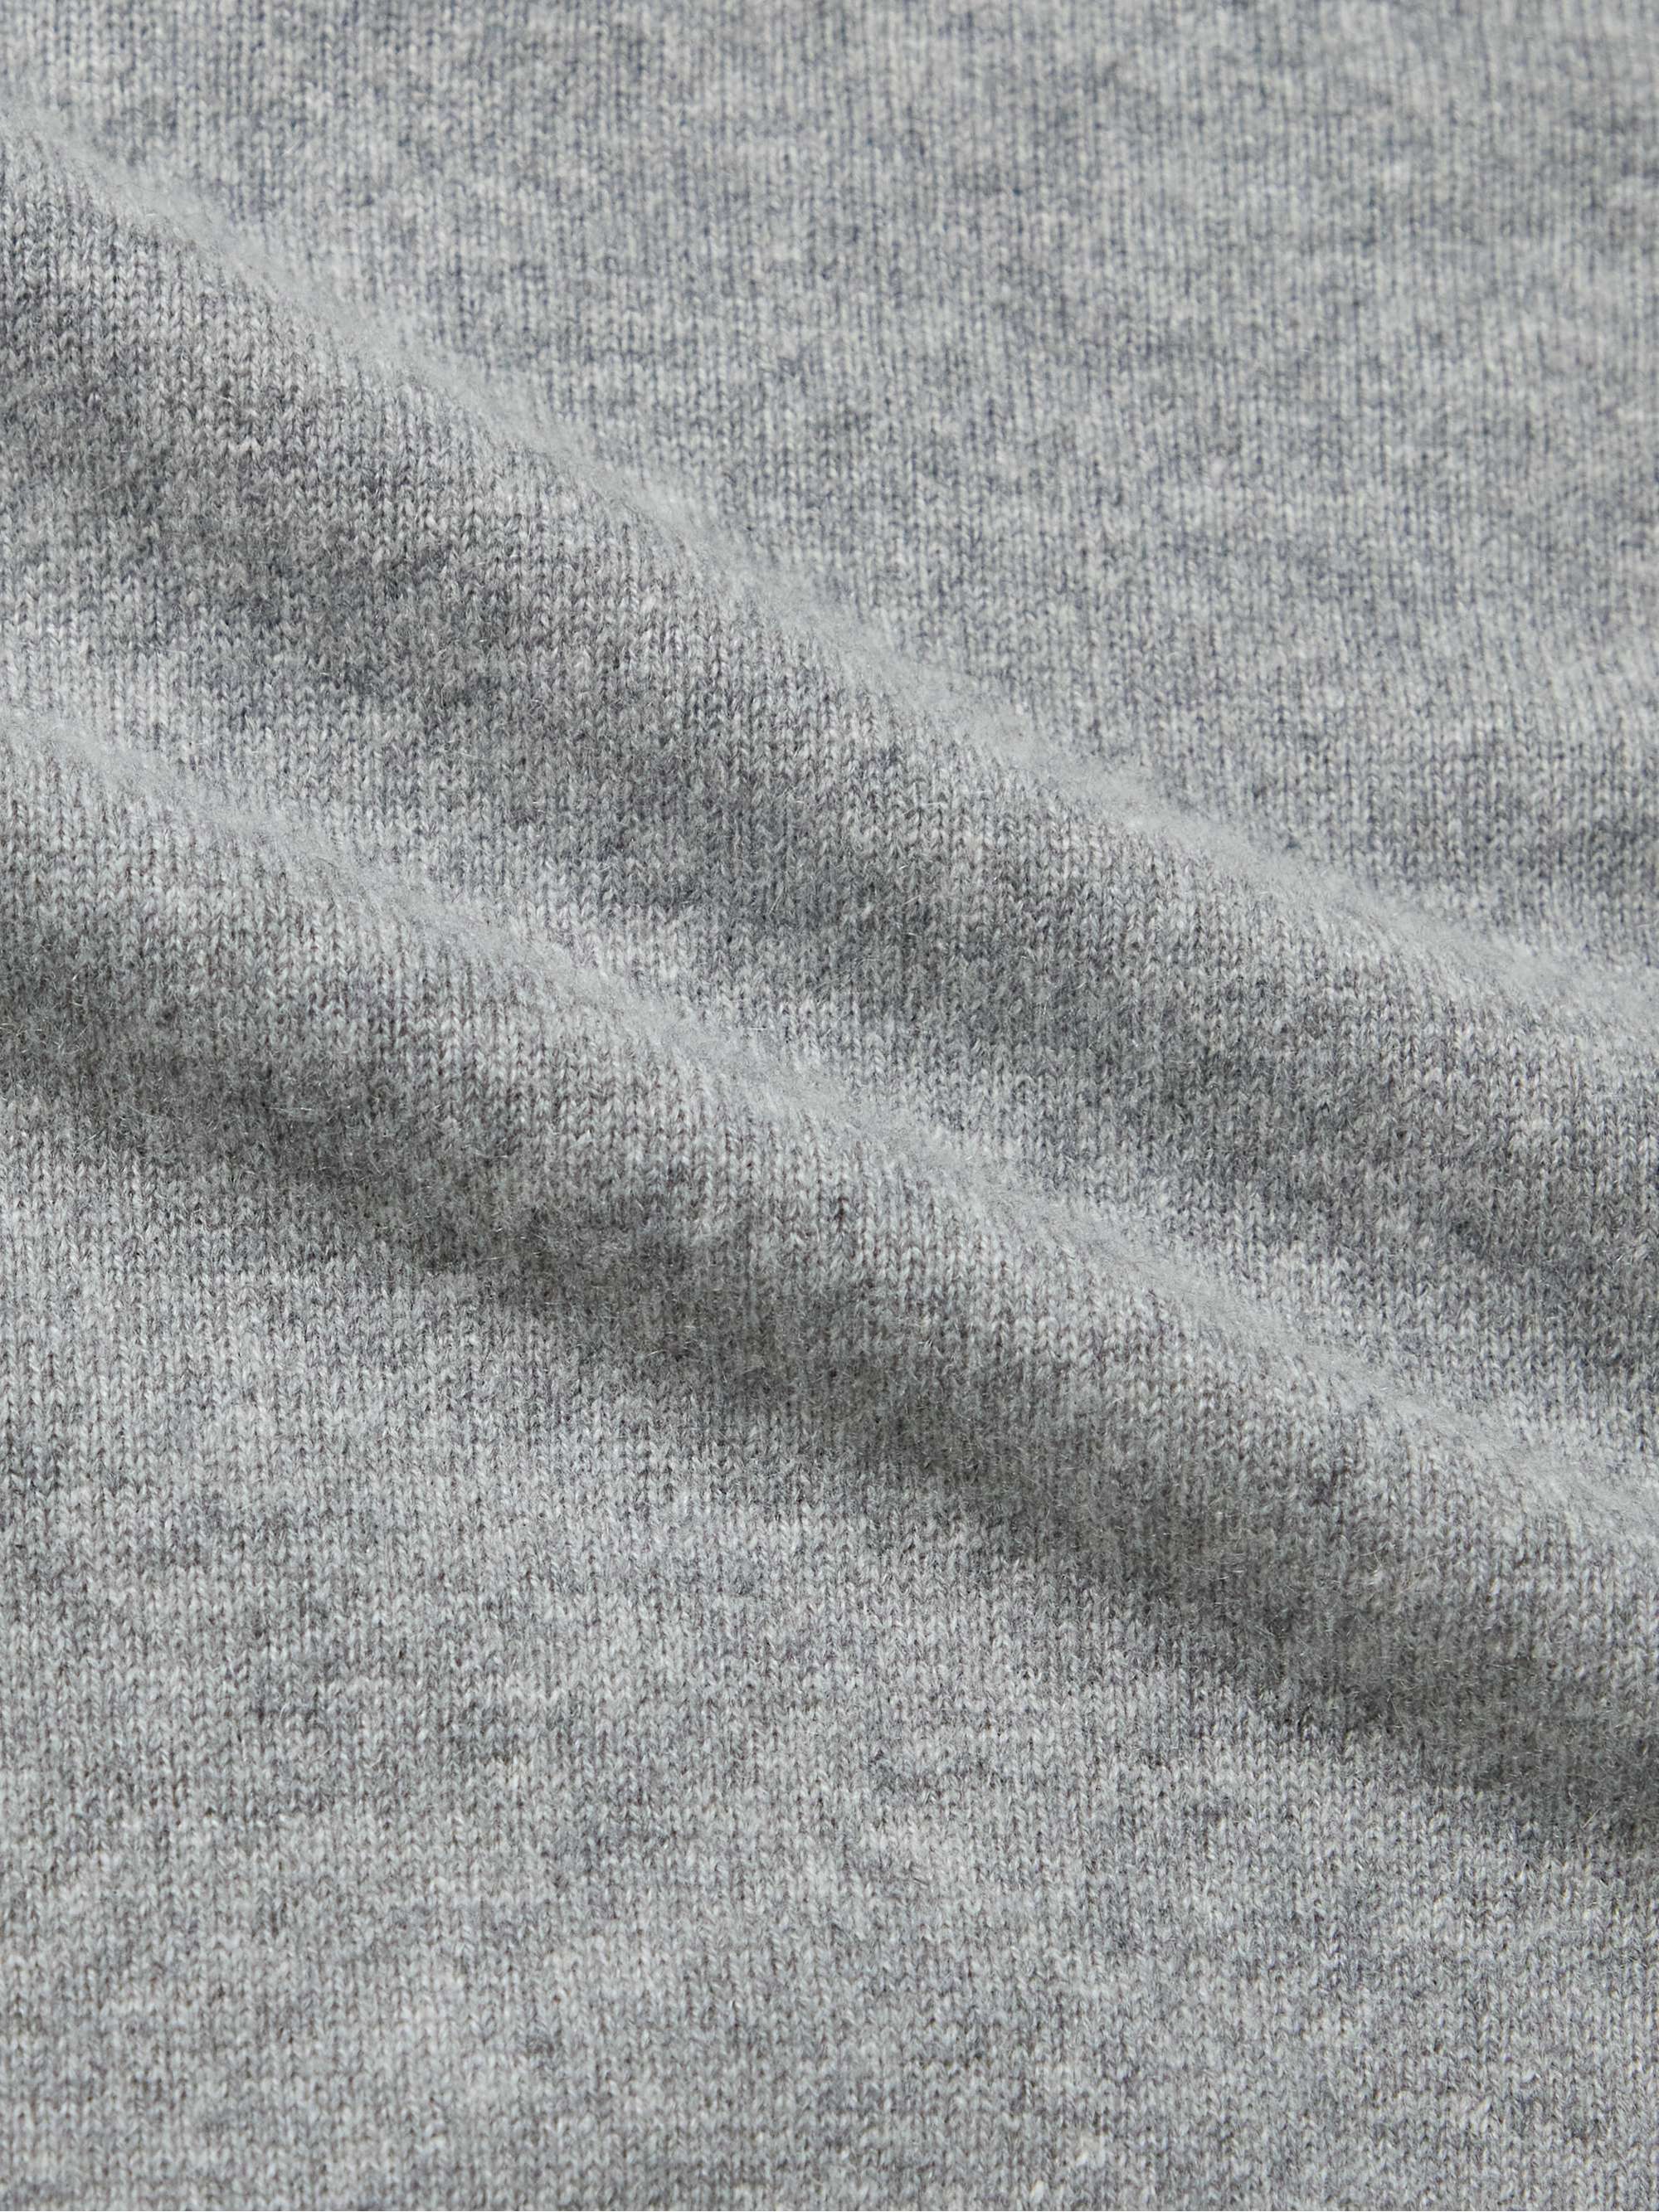 CLUB MONACO Core Recycled-Cashmere Sweater